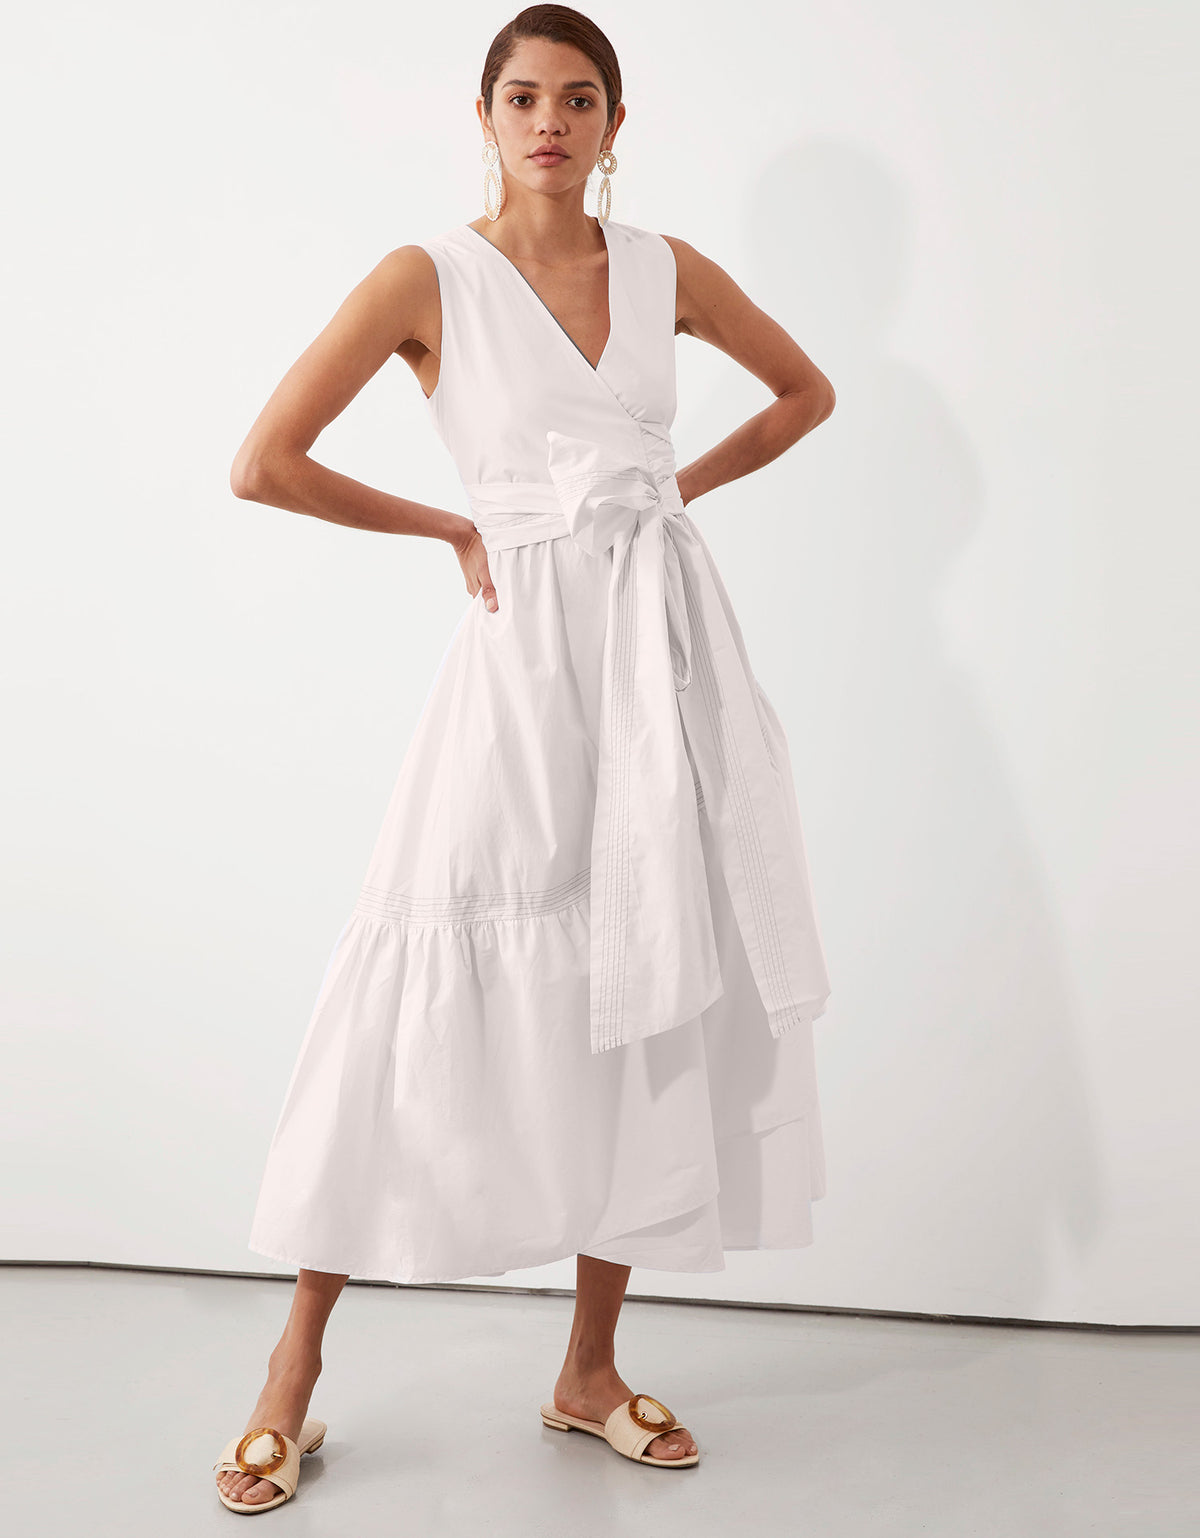 Parker Topstitch Wrap Dress in White by Apartment Clothing